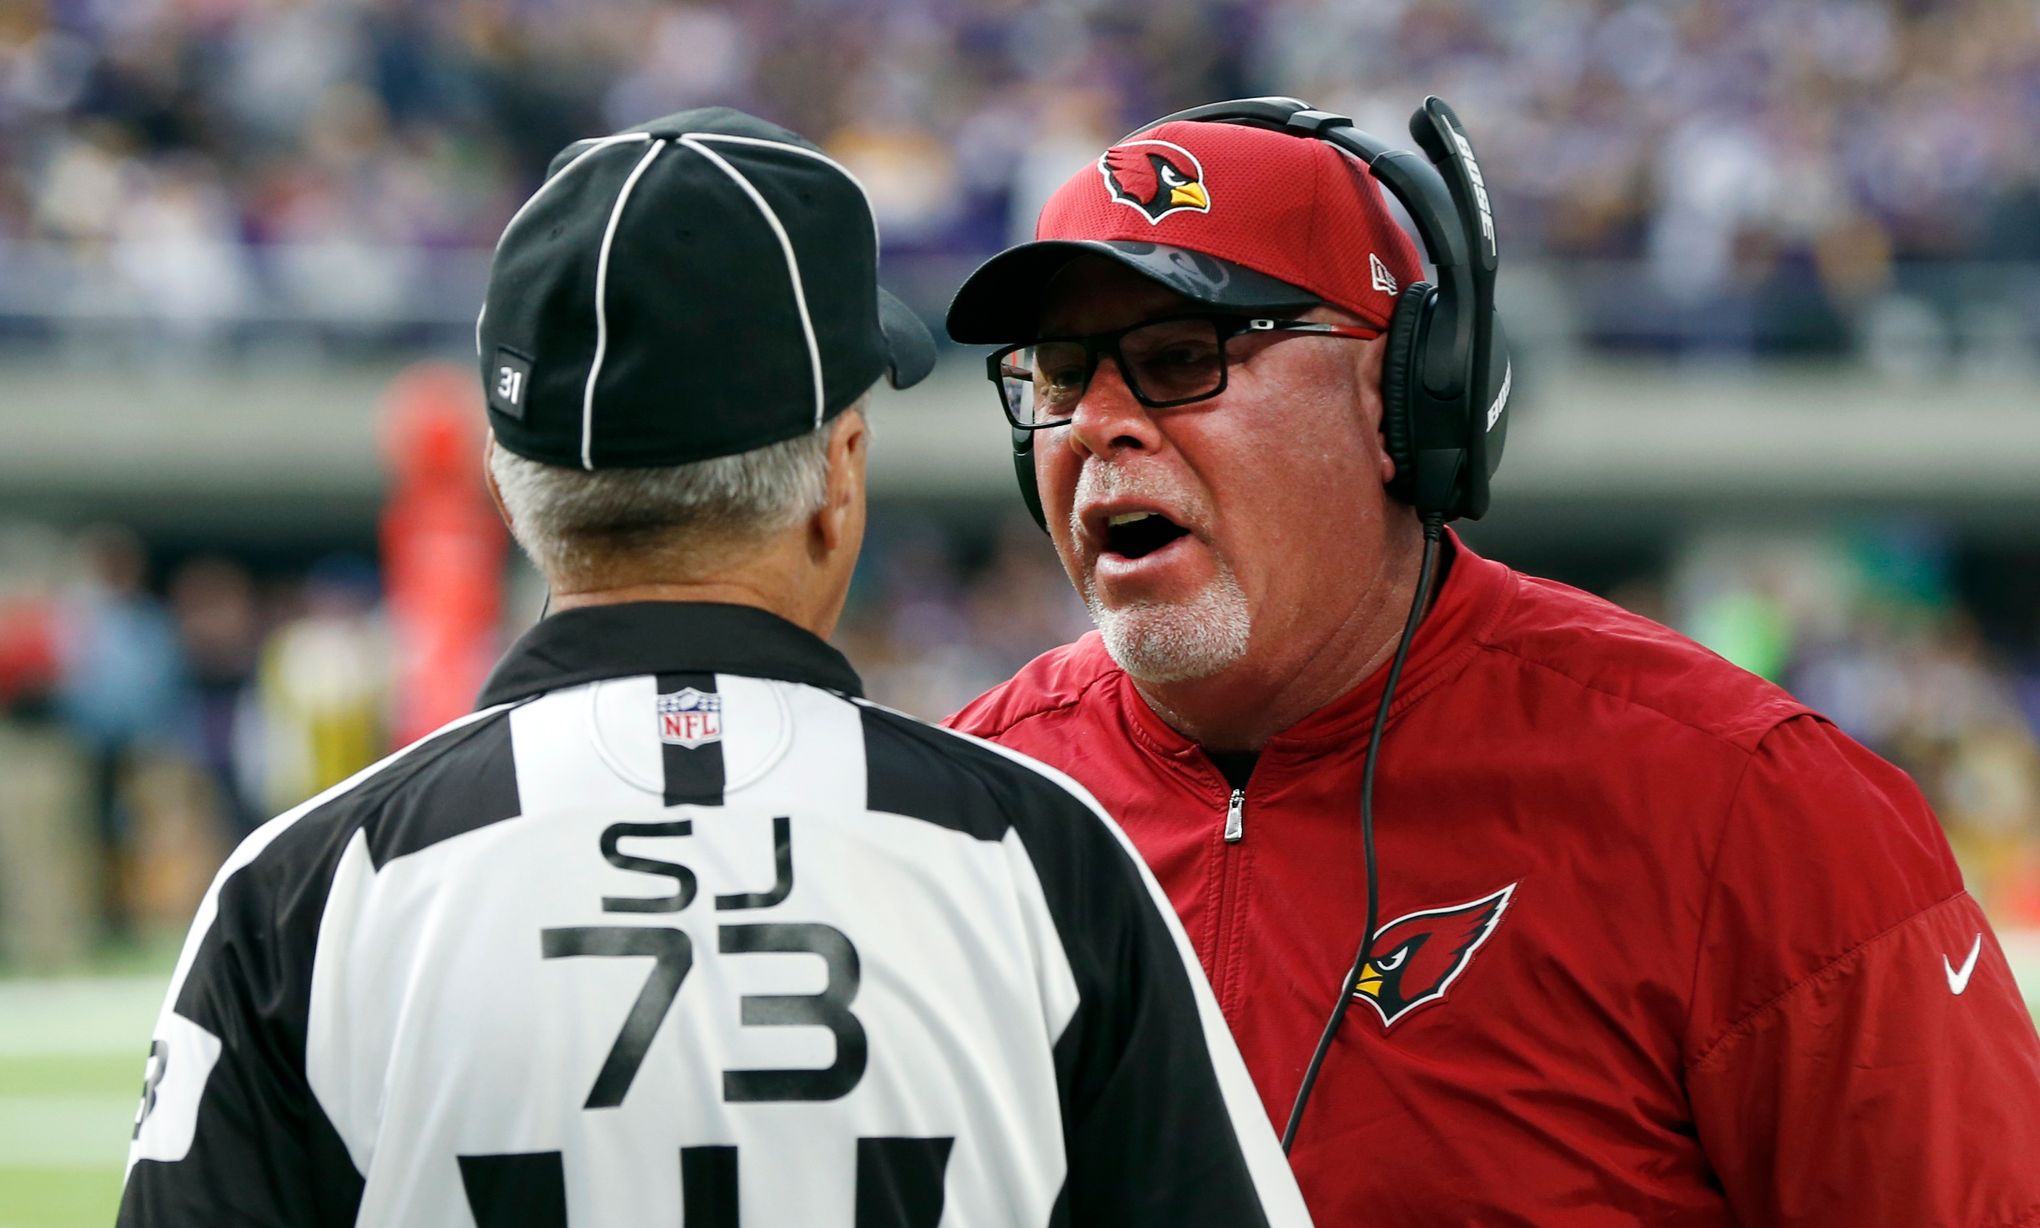 Bruce Arians says Bucs 'would've turned over every stone' to